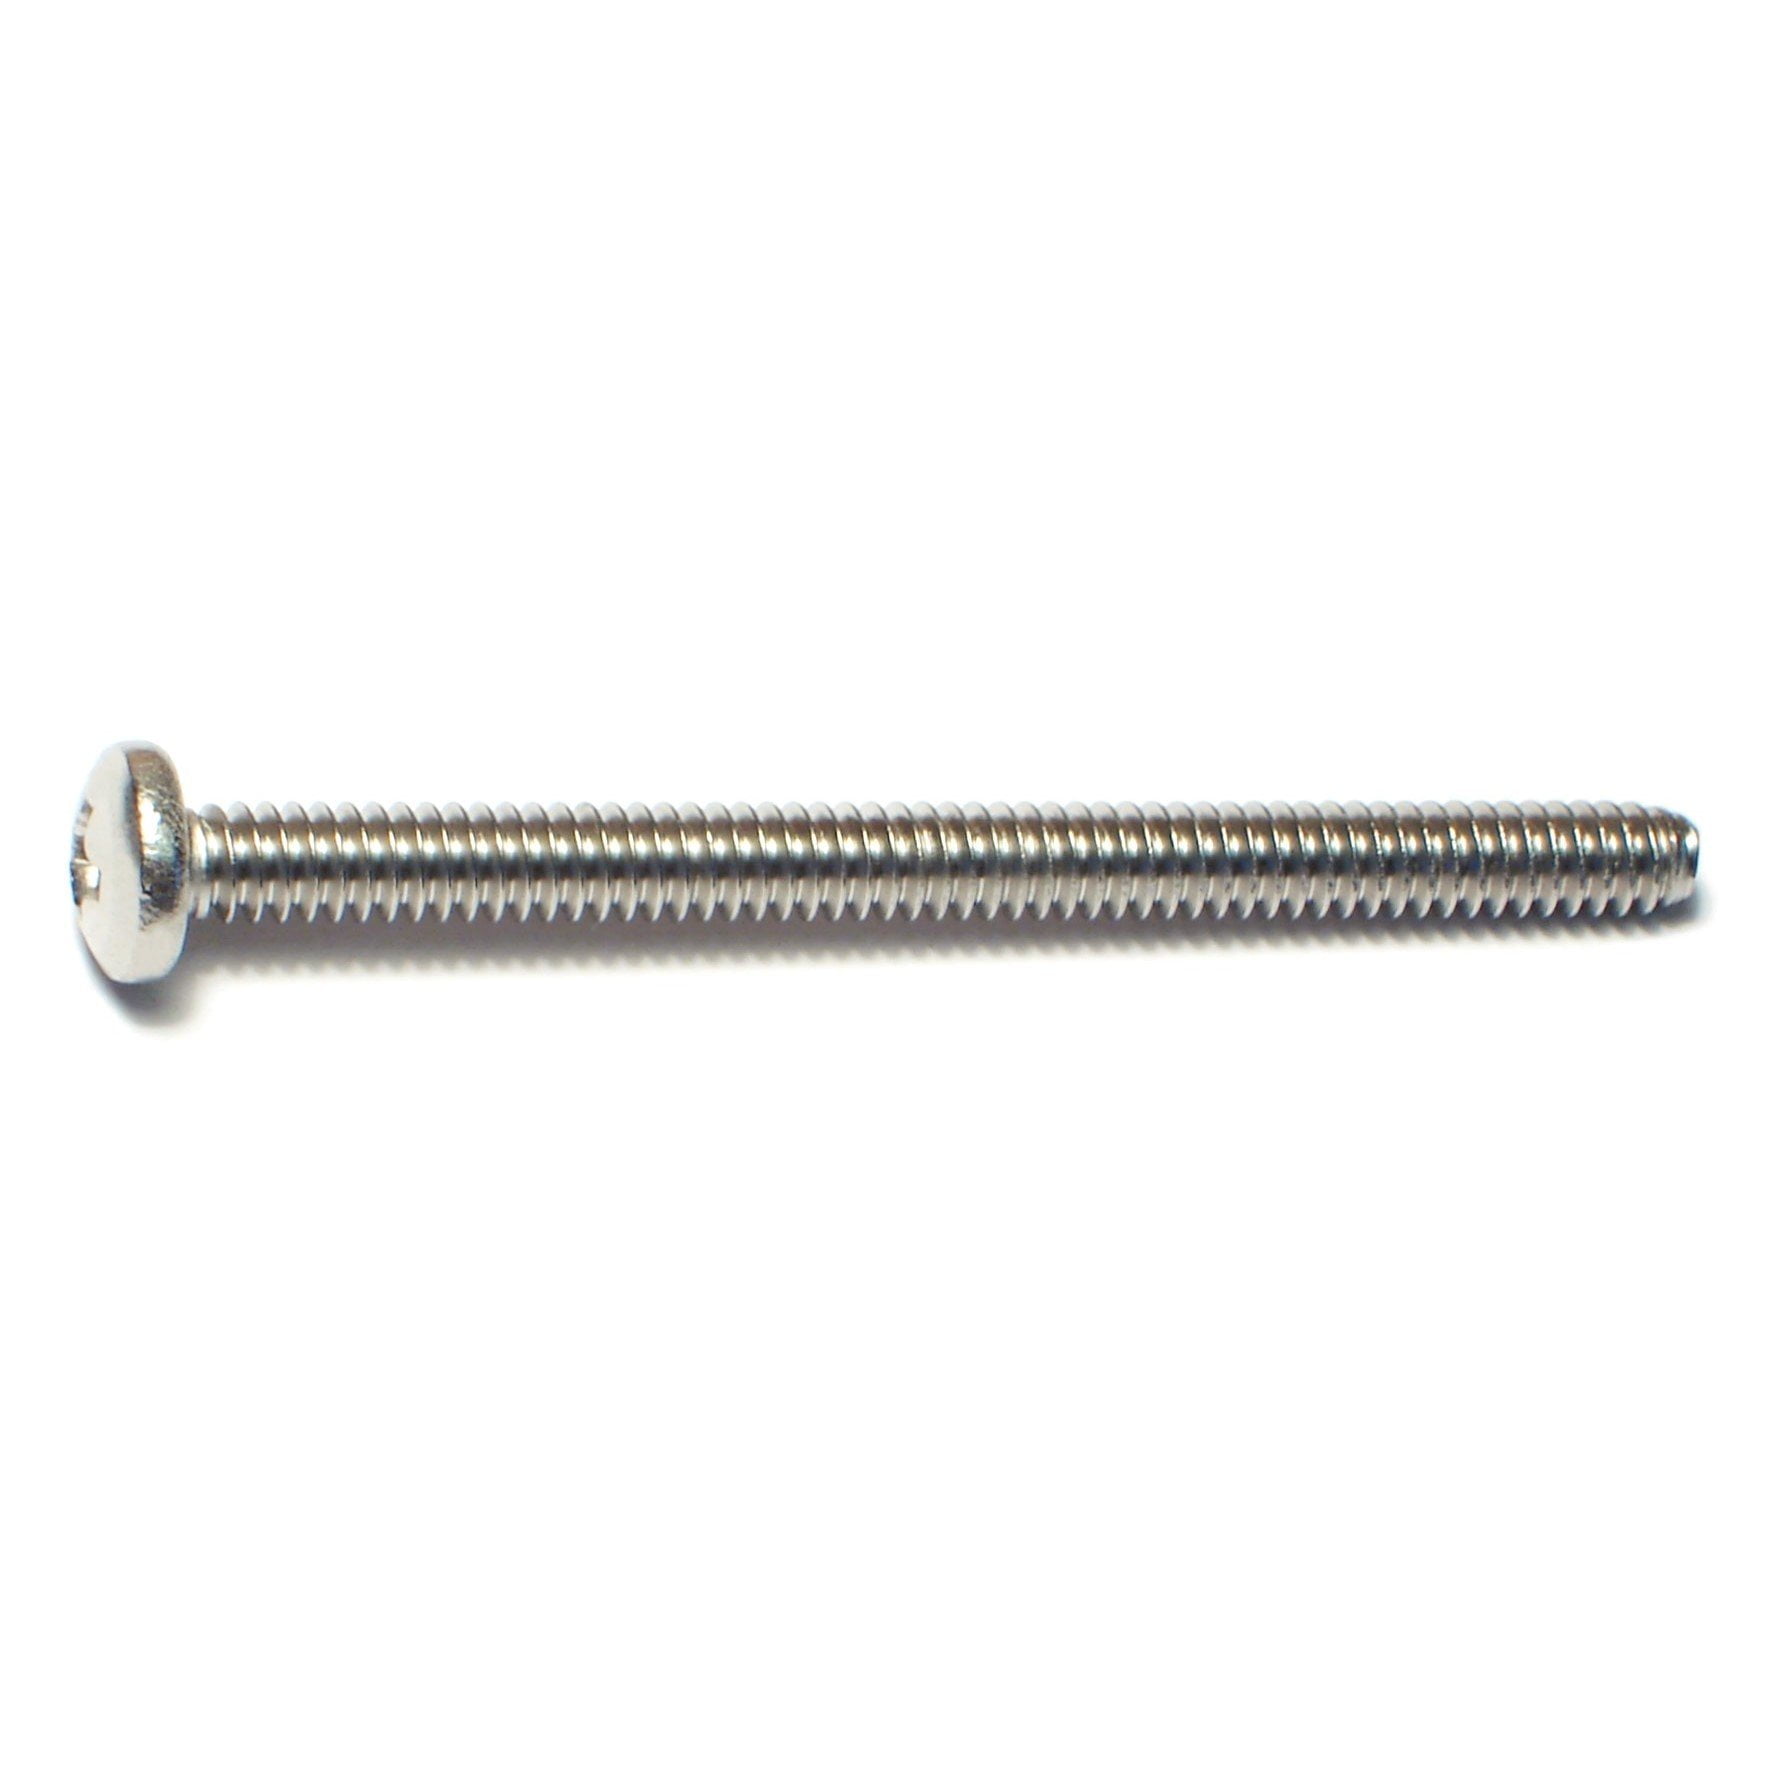 Phillips Pan Head Machine Screws Coarse Details about   #10-24 x 1/2" 18-8 Stainless Steel 